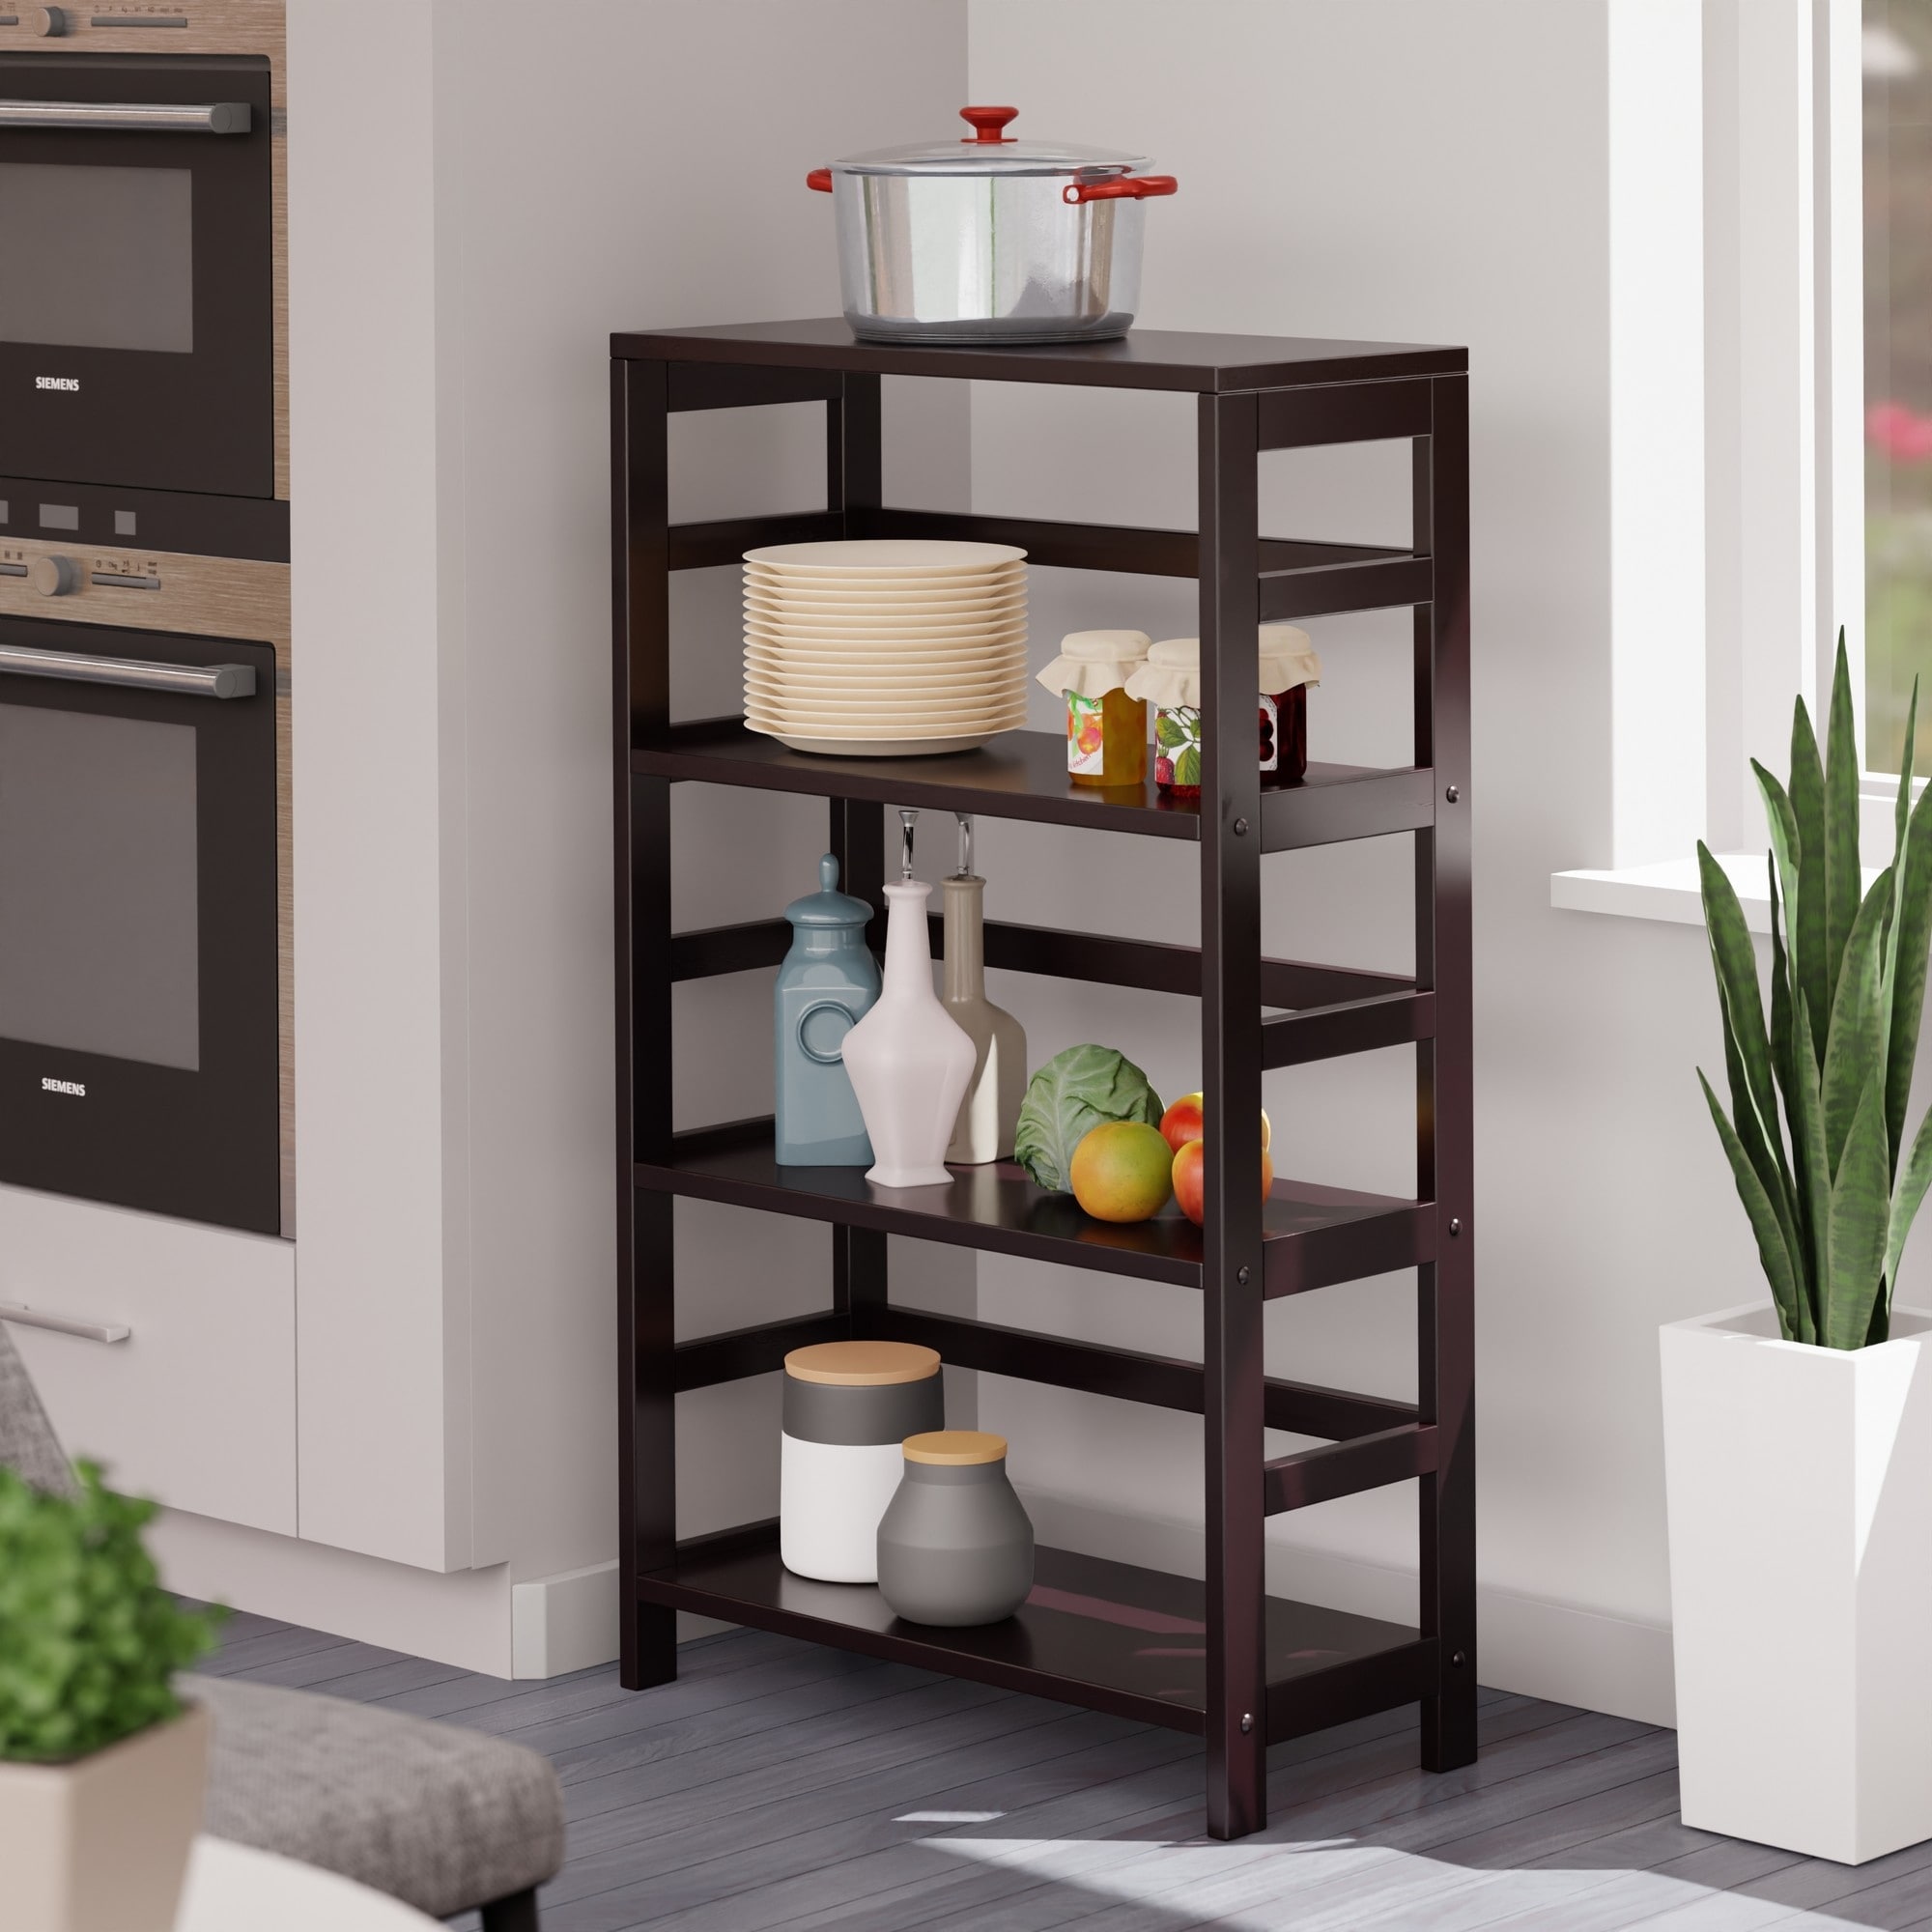 https://ak1.ostkcdn.com/images/products/is/images/direct/8c282759b6bf3b0163710571d79548d71bbb3b72/Leo-4-Pc-Storage-Shelf-with-3-Foldable-Woven-Baskets%2C-Espresso-and-Chocolate.jpg